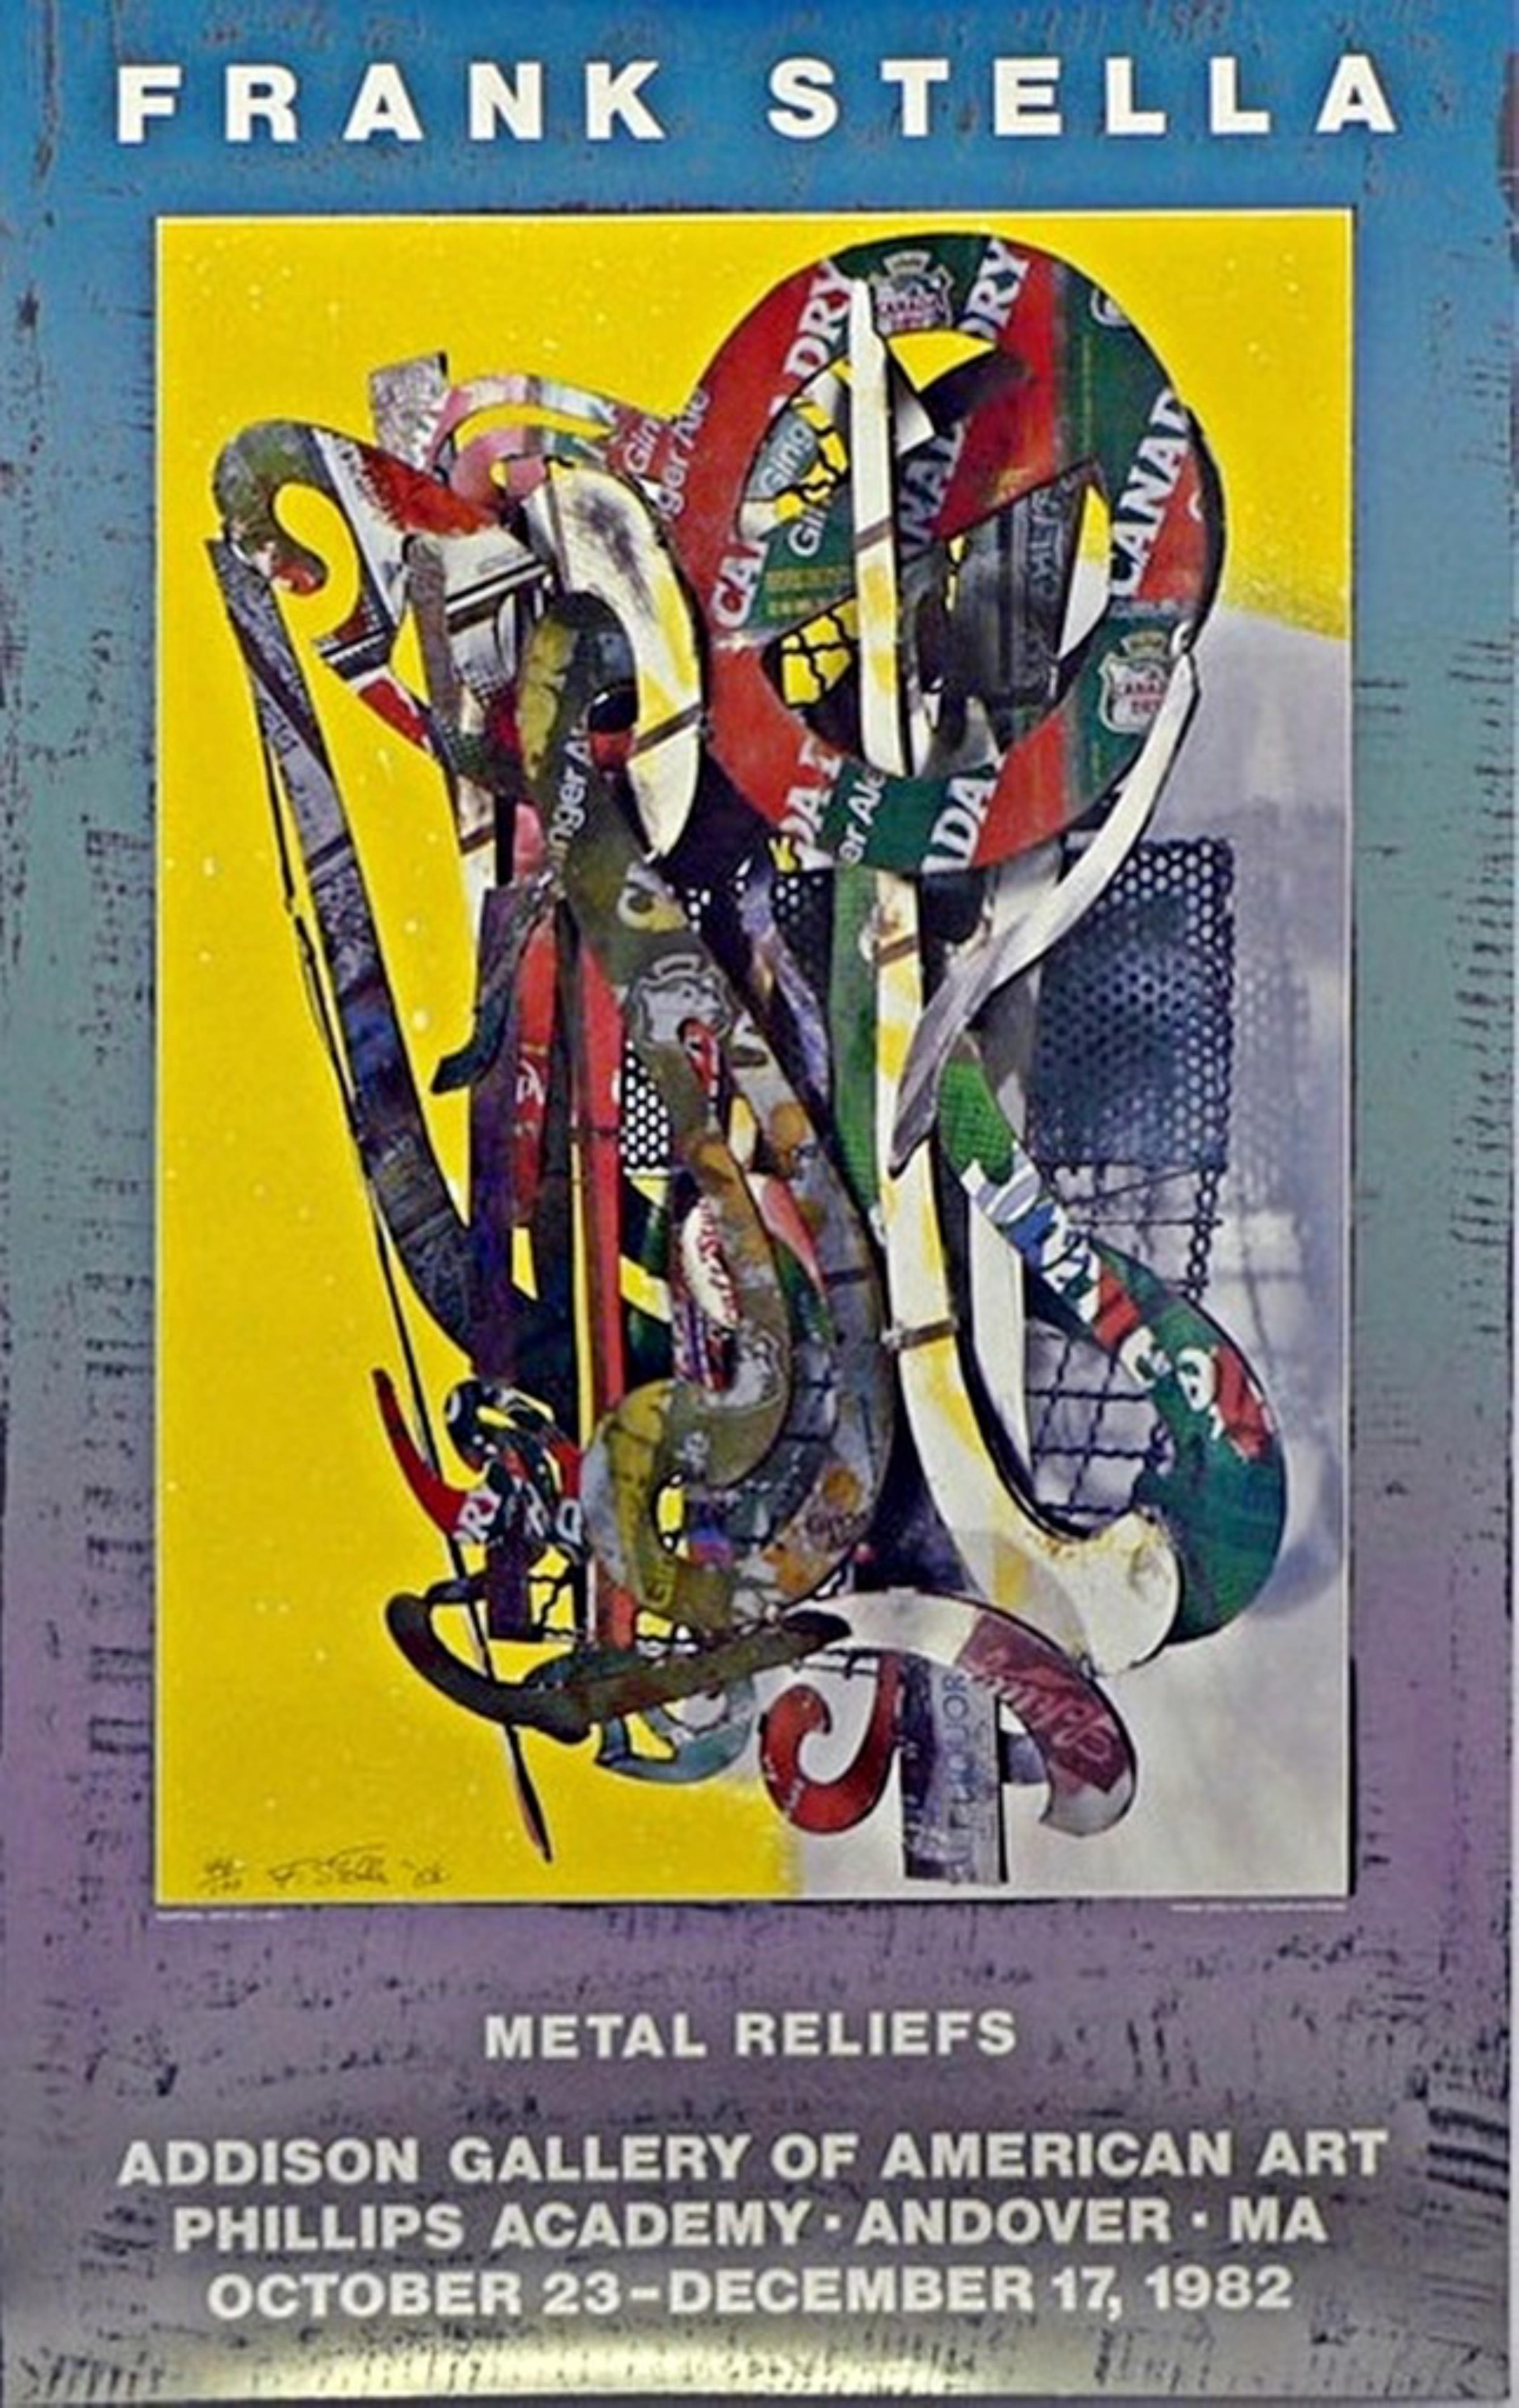 Frank Stella Print - Metal Reliefs, Phillips Andover Academy, Limited Edition Signed Numbered Edition